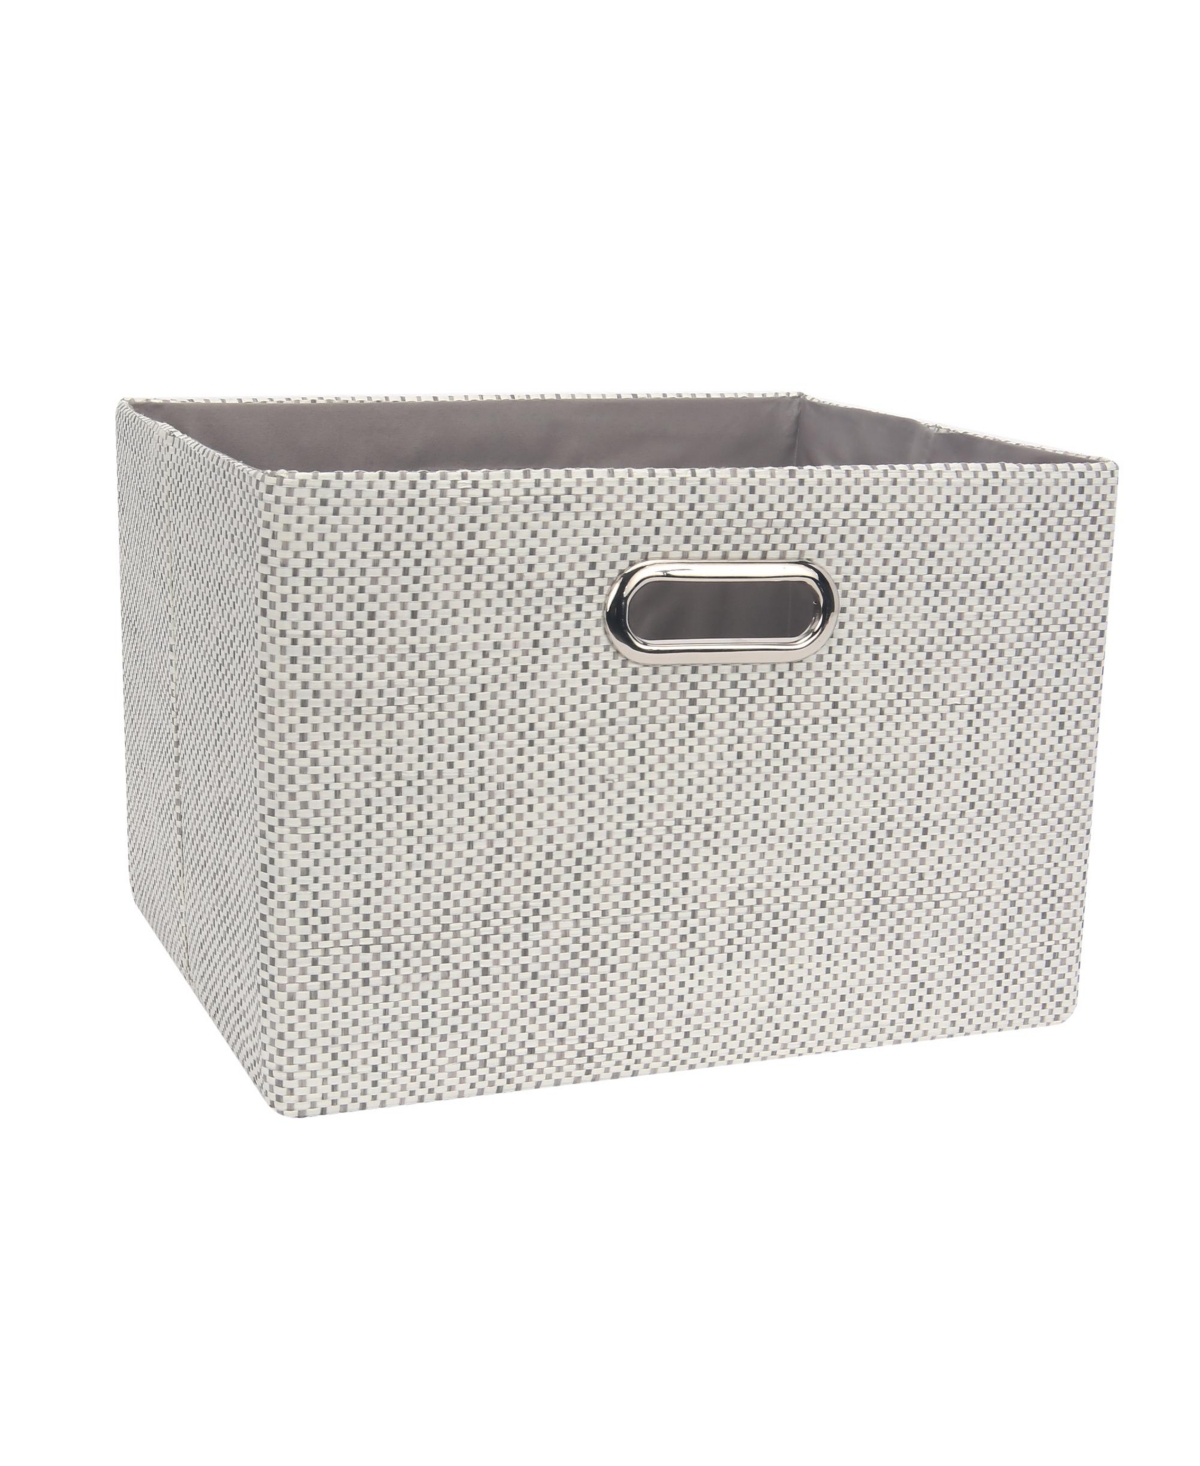 Lambs Ivy Gray Foldable/Collapsible Storage Bin/Basket Organizer with Handles - Gray